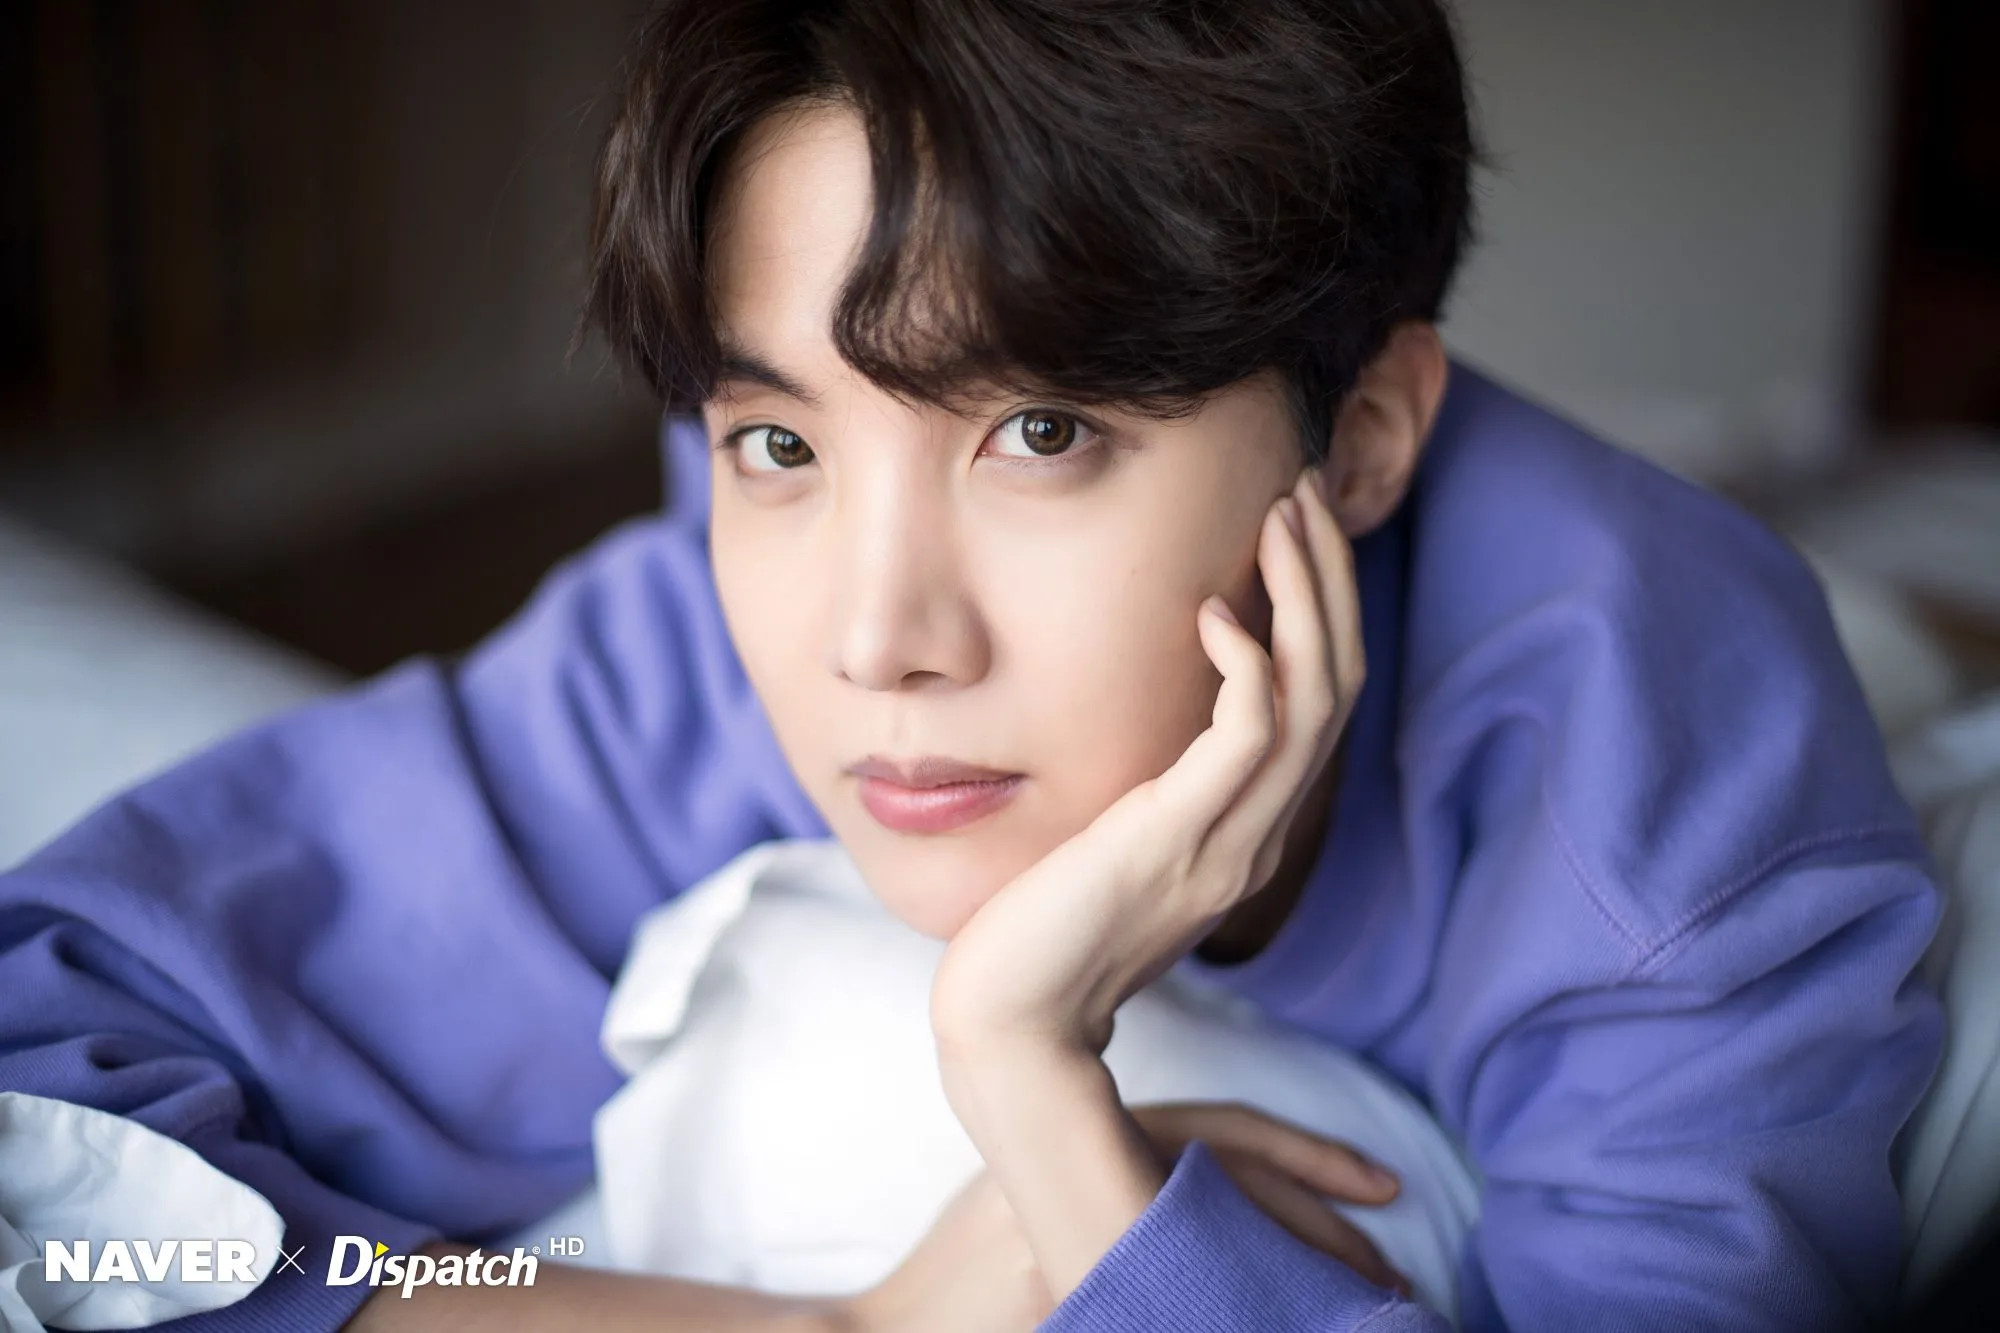 BTS PICS FOLDER 📁 on X: [📸PHOTOS] #Jhope at 2023 New Year's